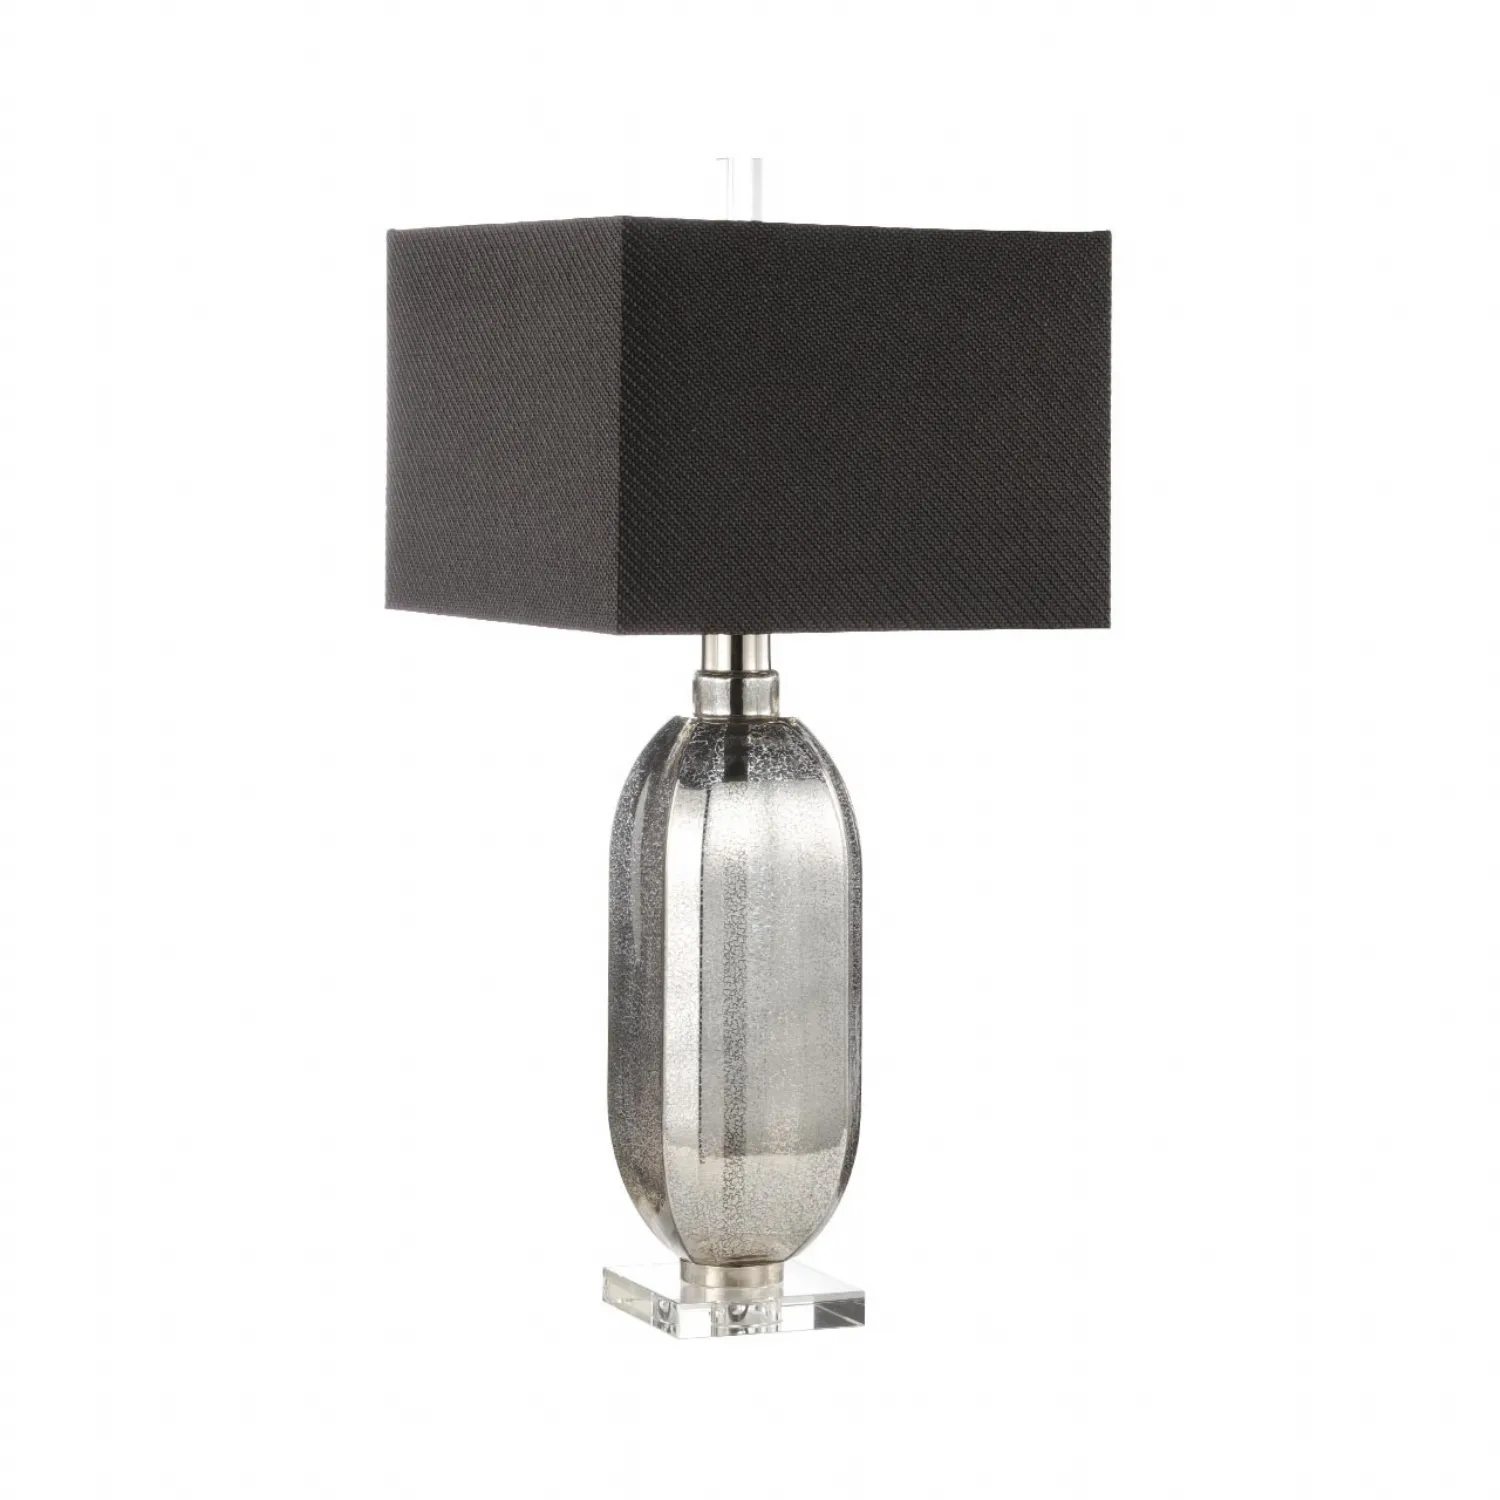 83. 8cm Silver Mercury Glass Table Lamp With Dark Grey Linen Shade